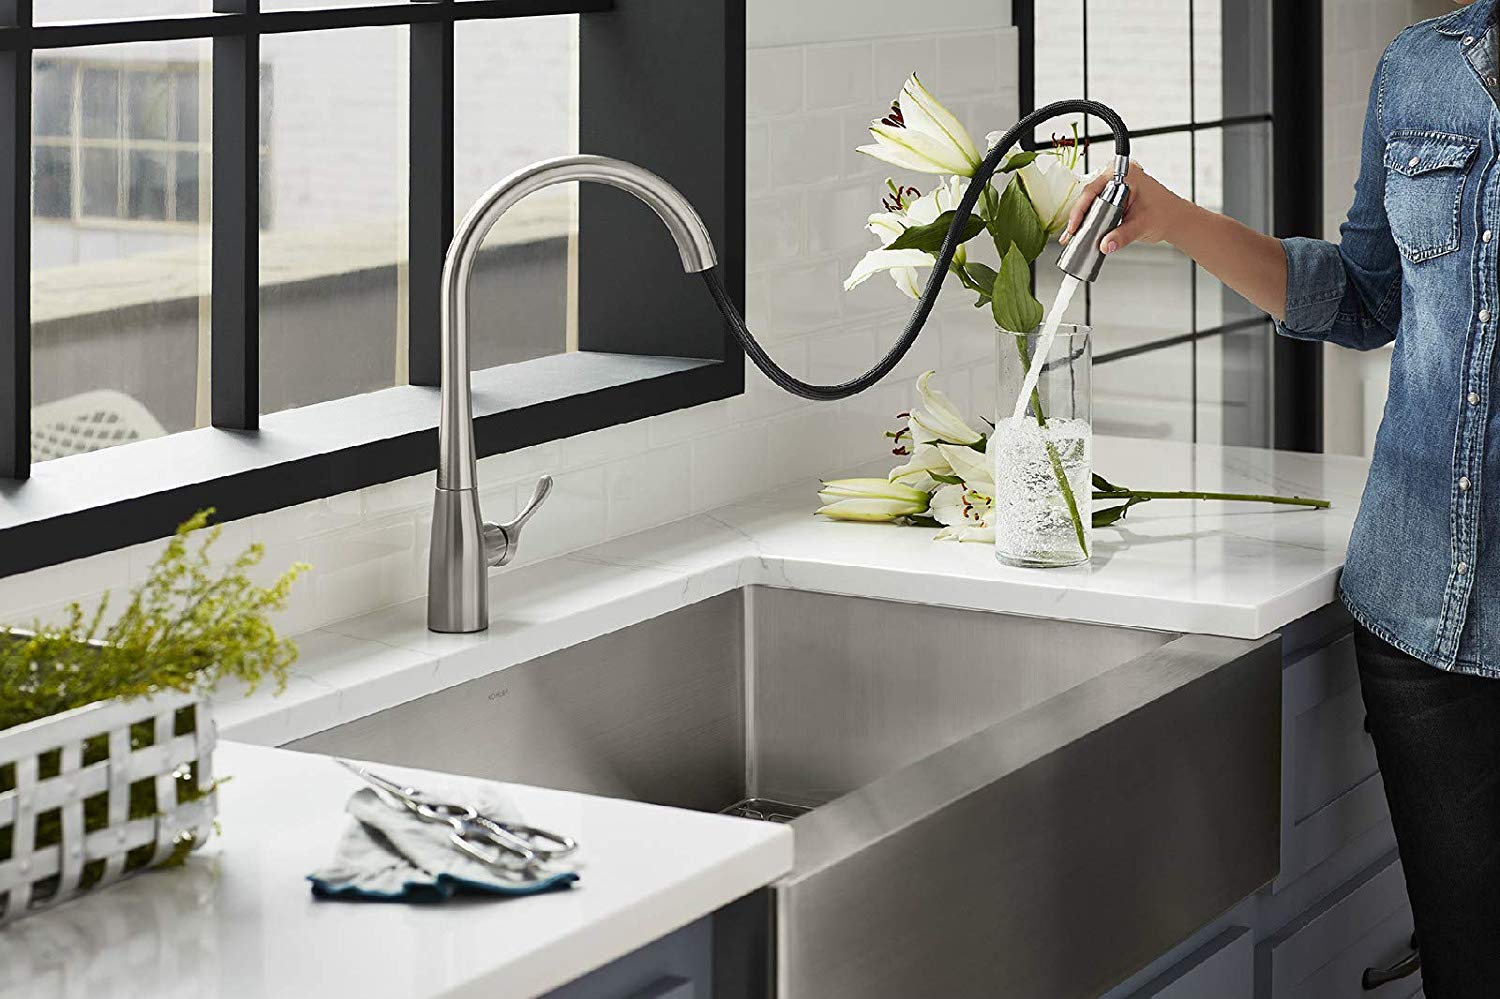  Pull Out Brushed Stainless One Hole Kitchen Faucet Cold and Hot Water